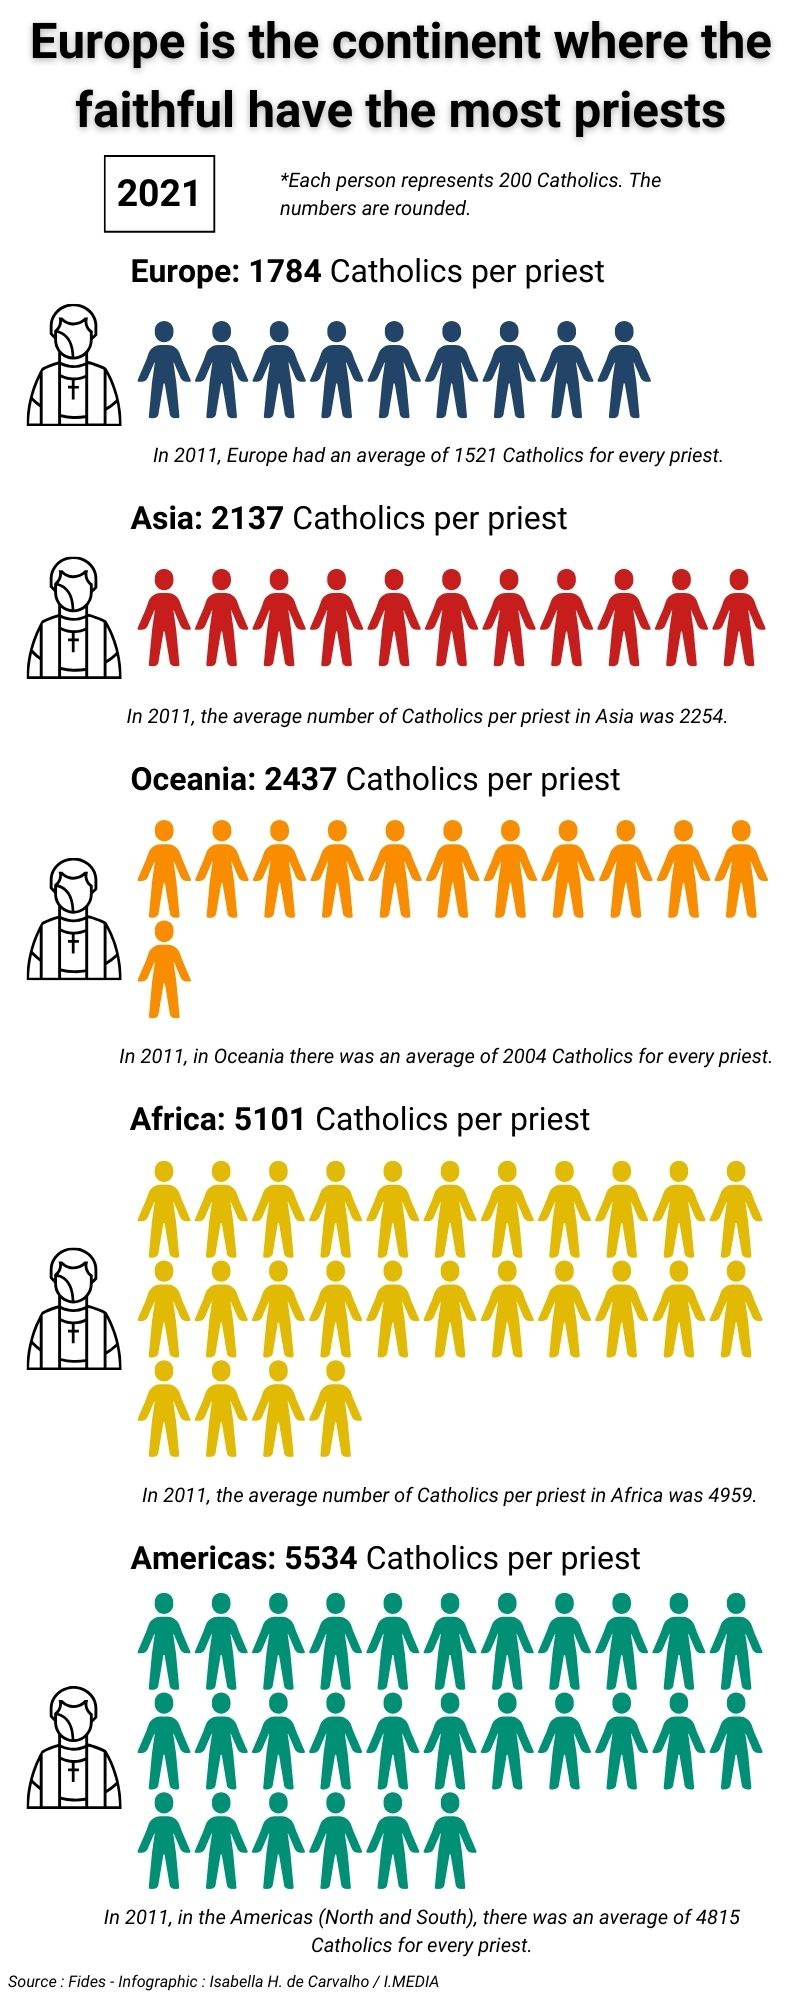 An infographic showing the number of Catholics per priest by continent